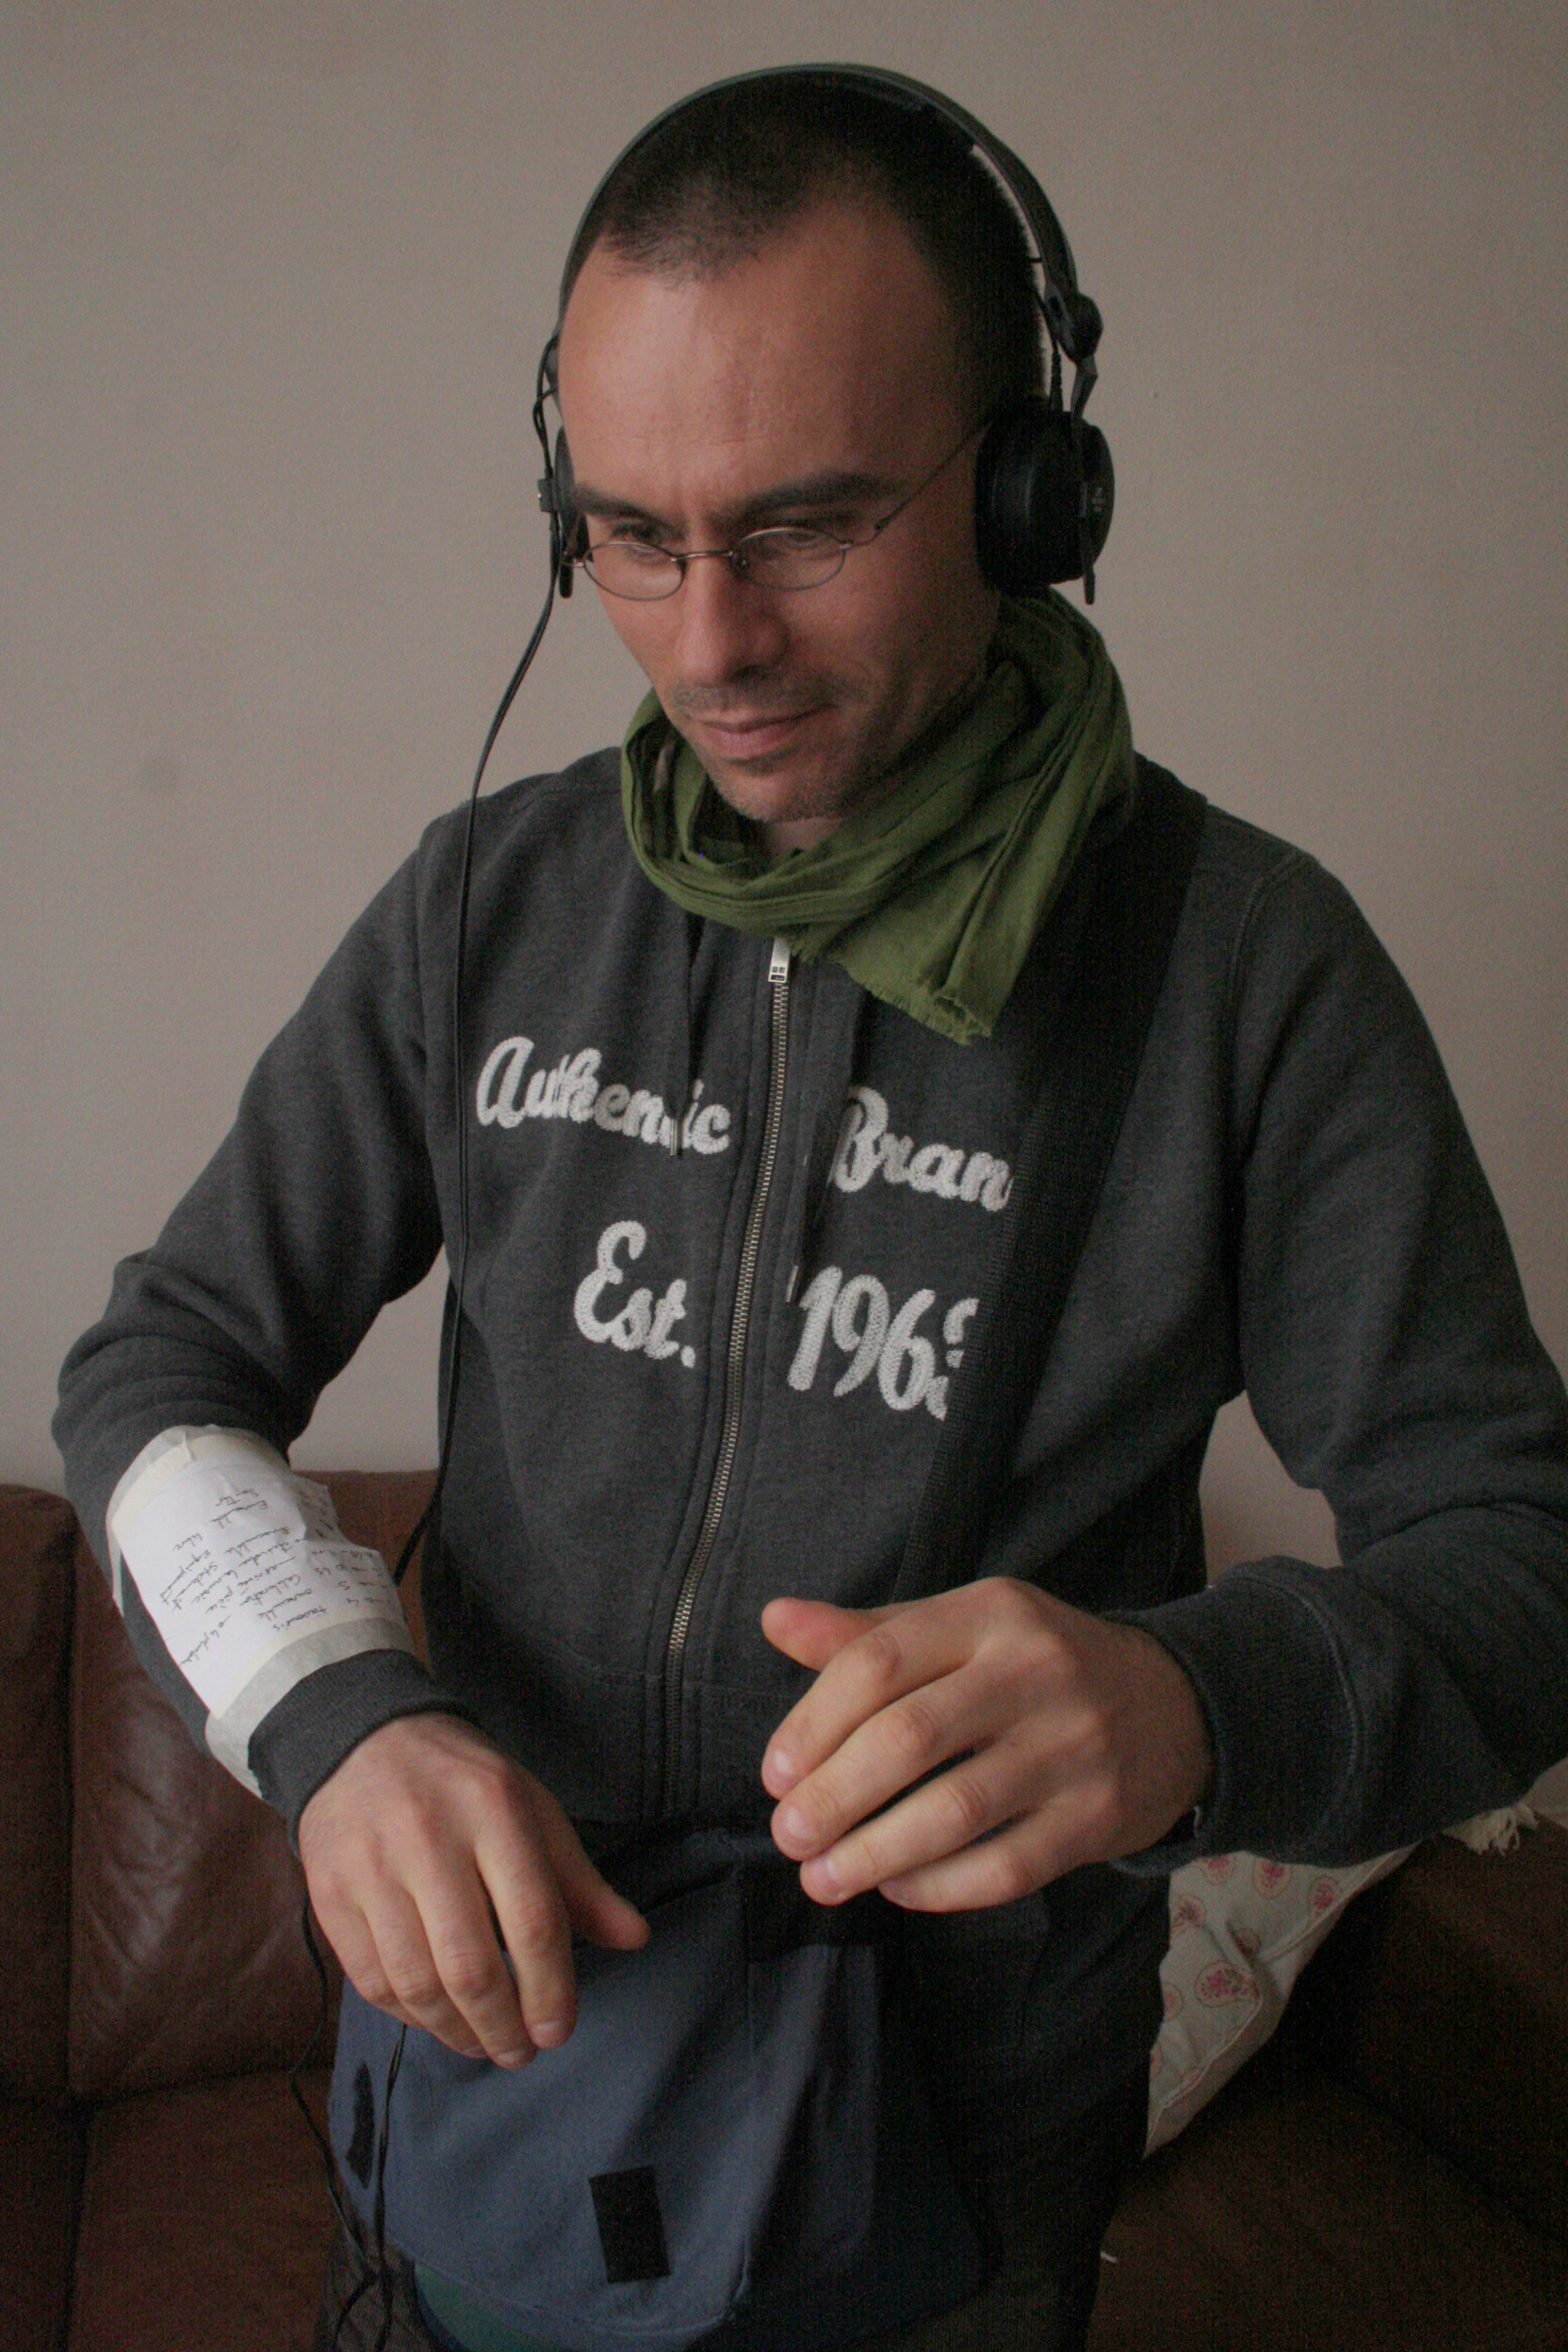 Man with headphones and sound gear looks at a score taped to his wrist